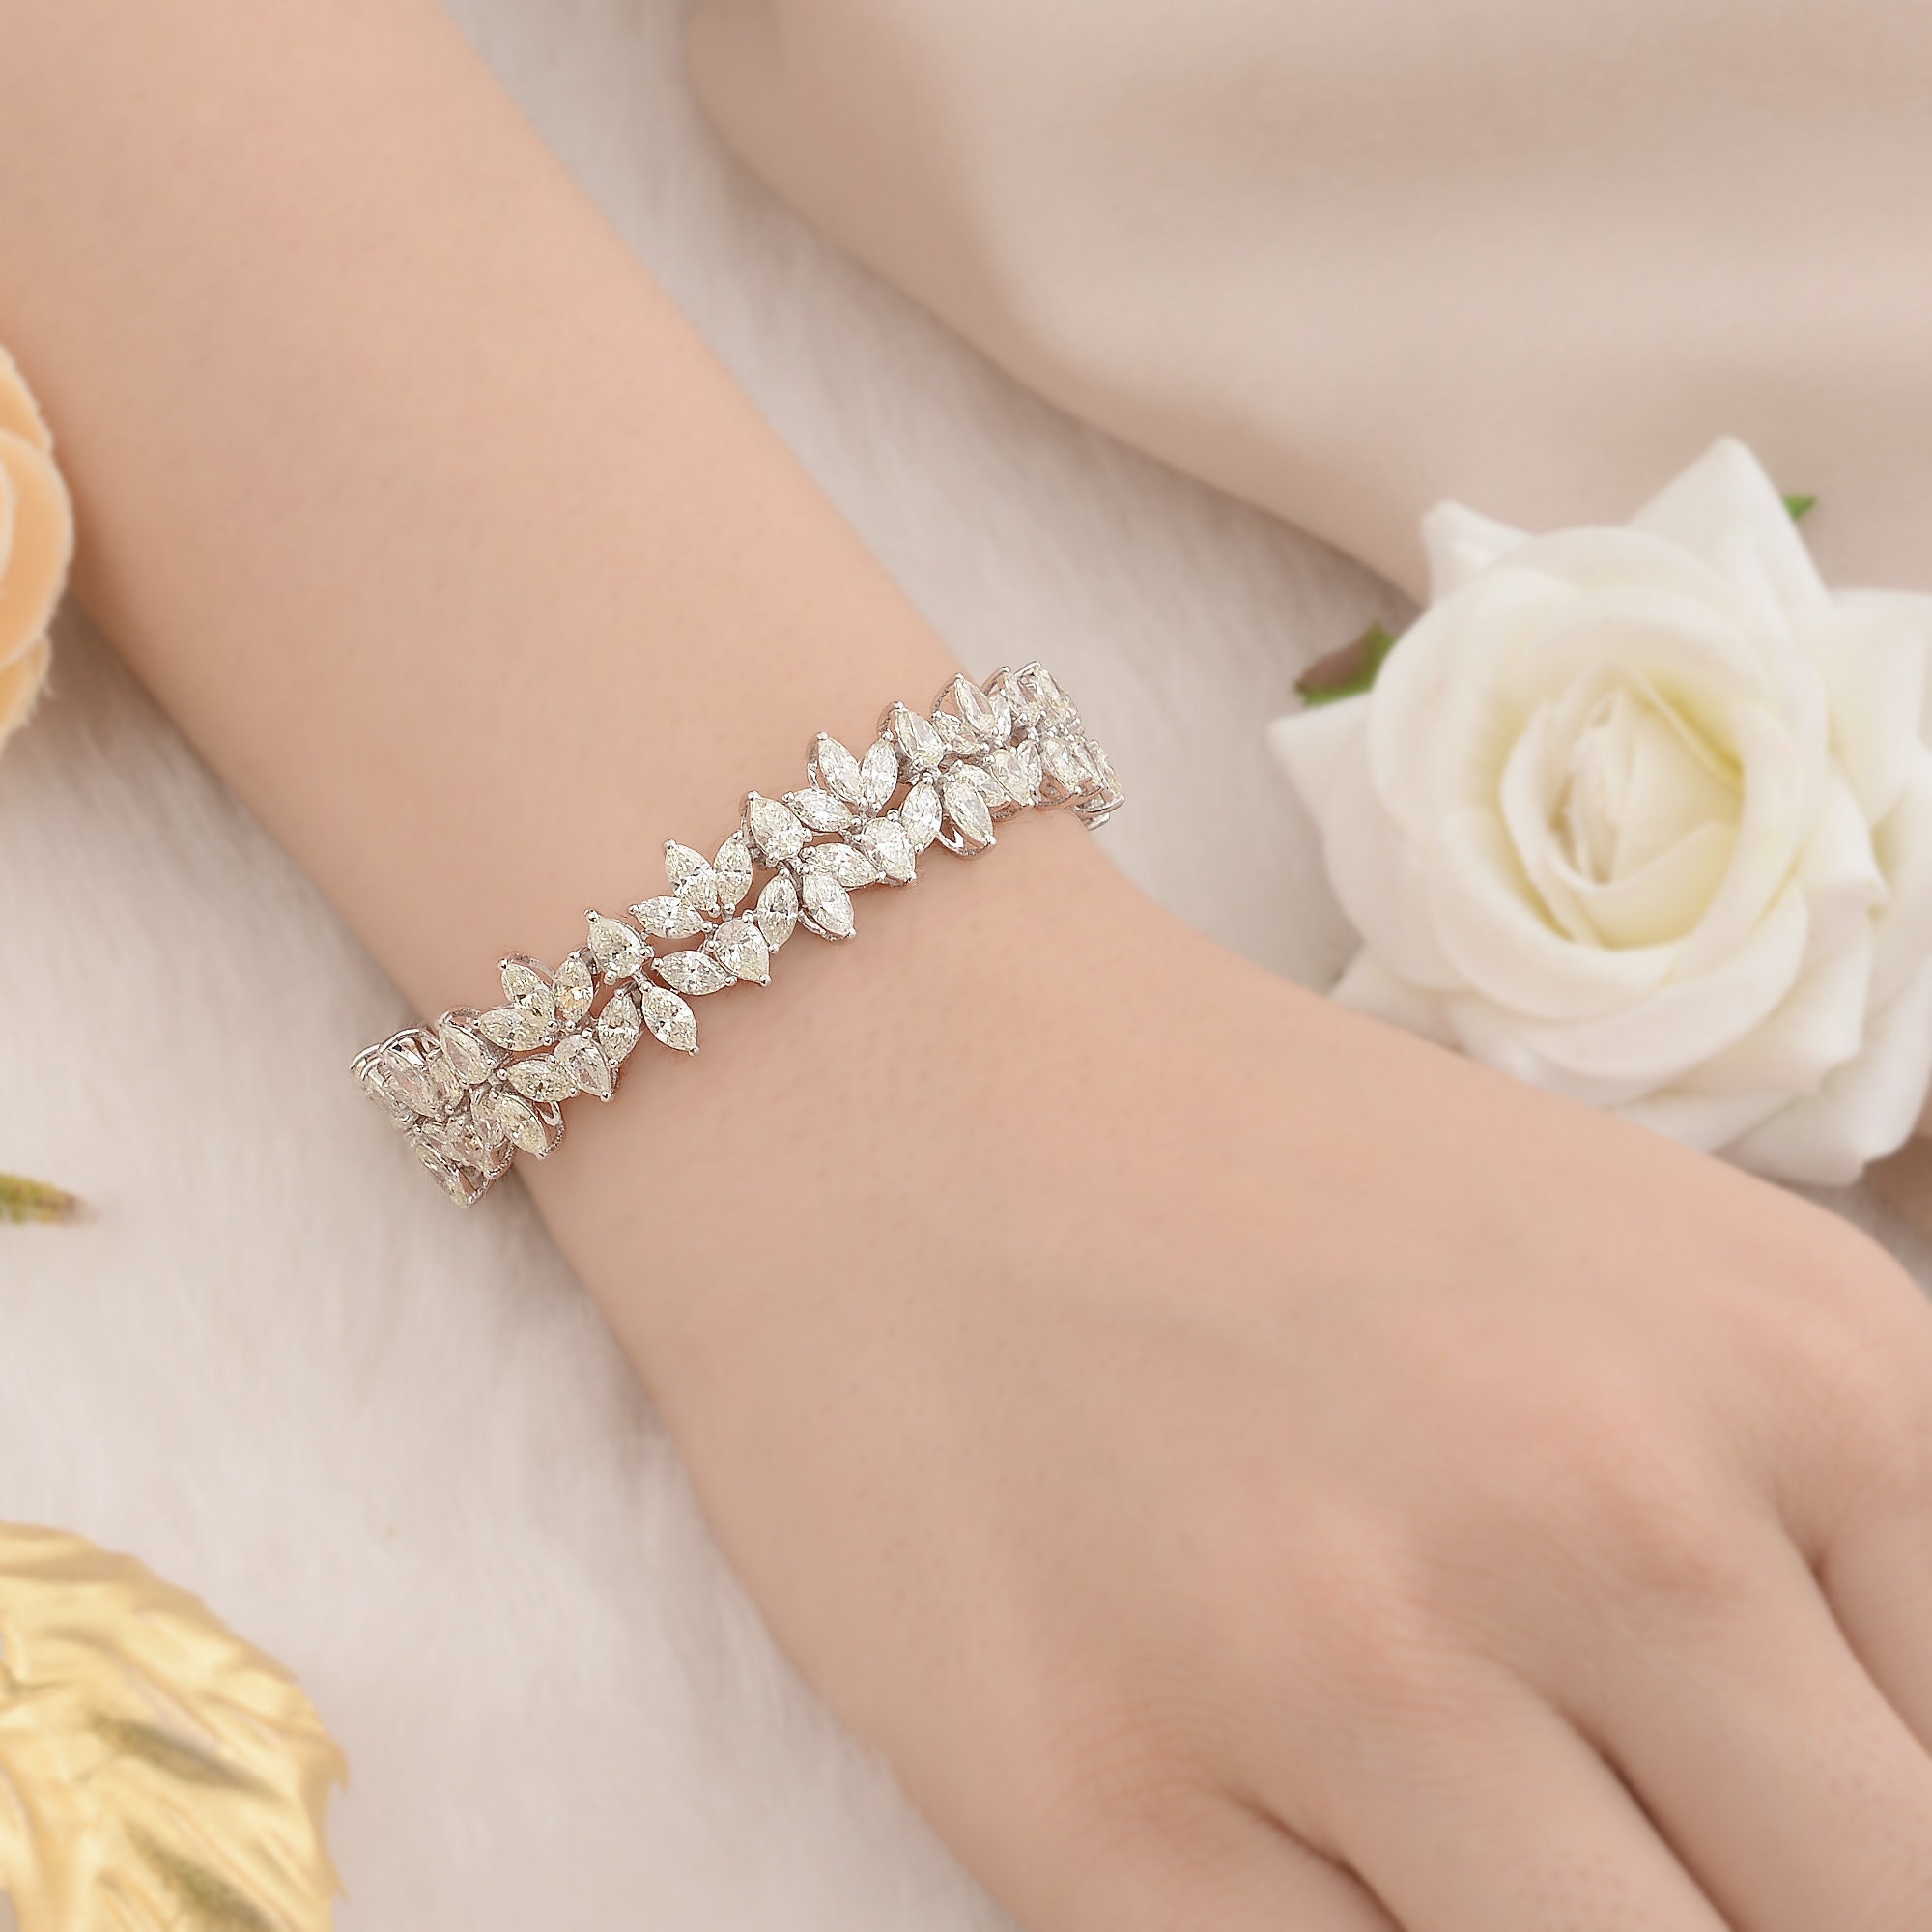 All You Want to Know About Diamond Bracelets for Women - The Caratlane